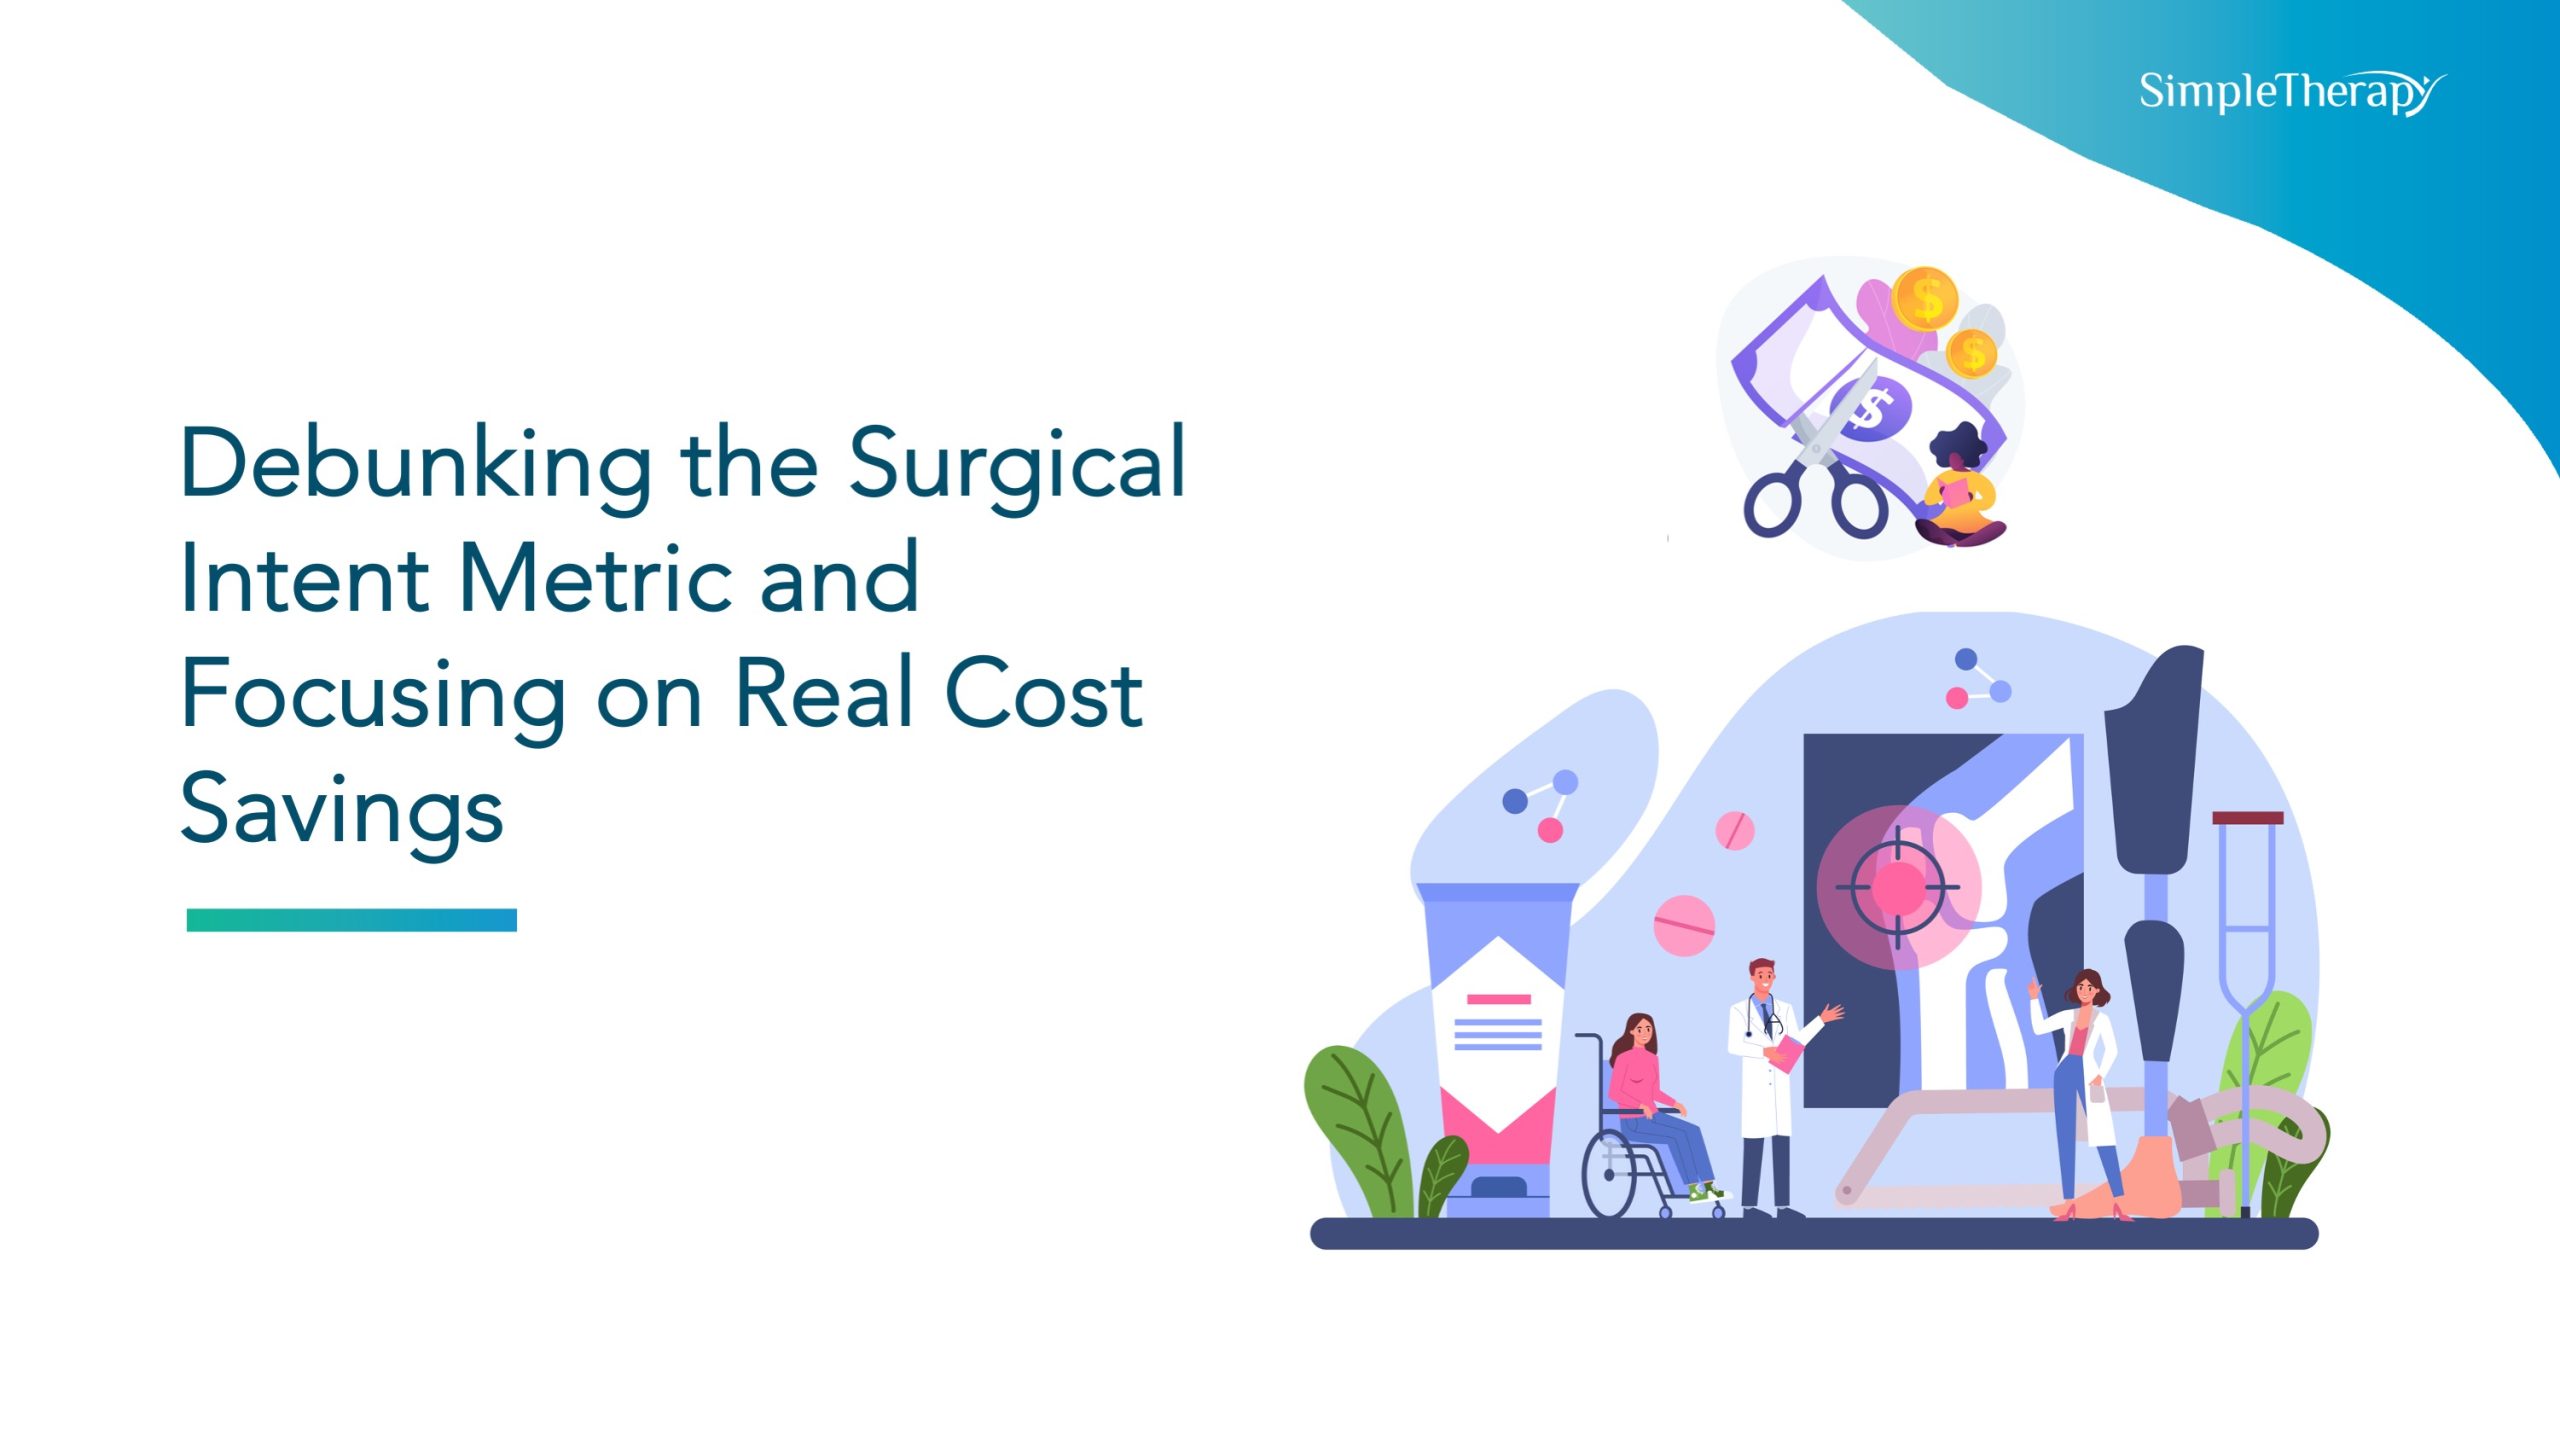 Debunking the Surgical Intent Metric and Focusing on Real Cost Savings